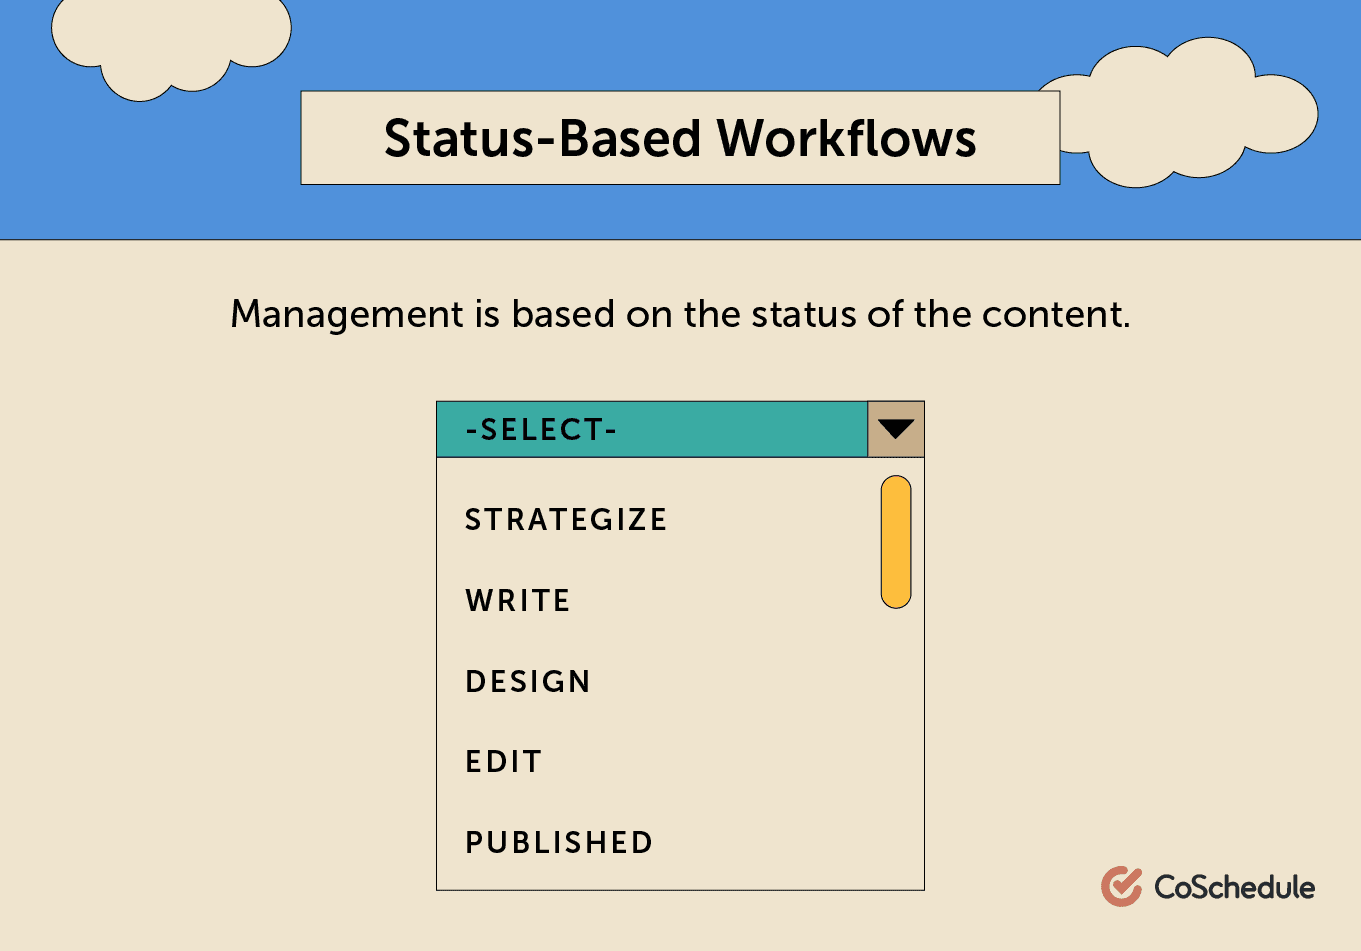 The different stages of status based workflows by CoSchedule.